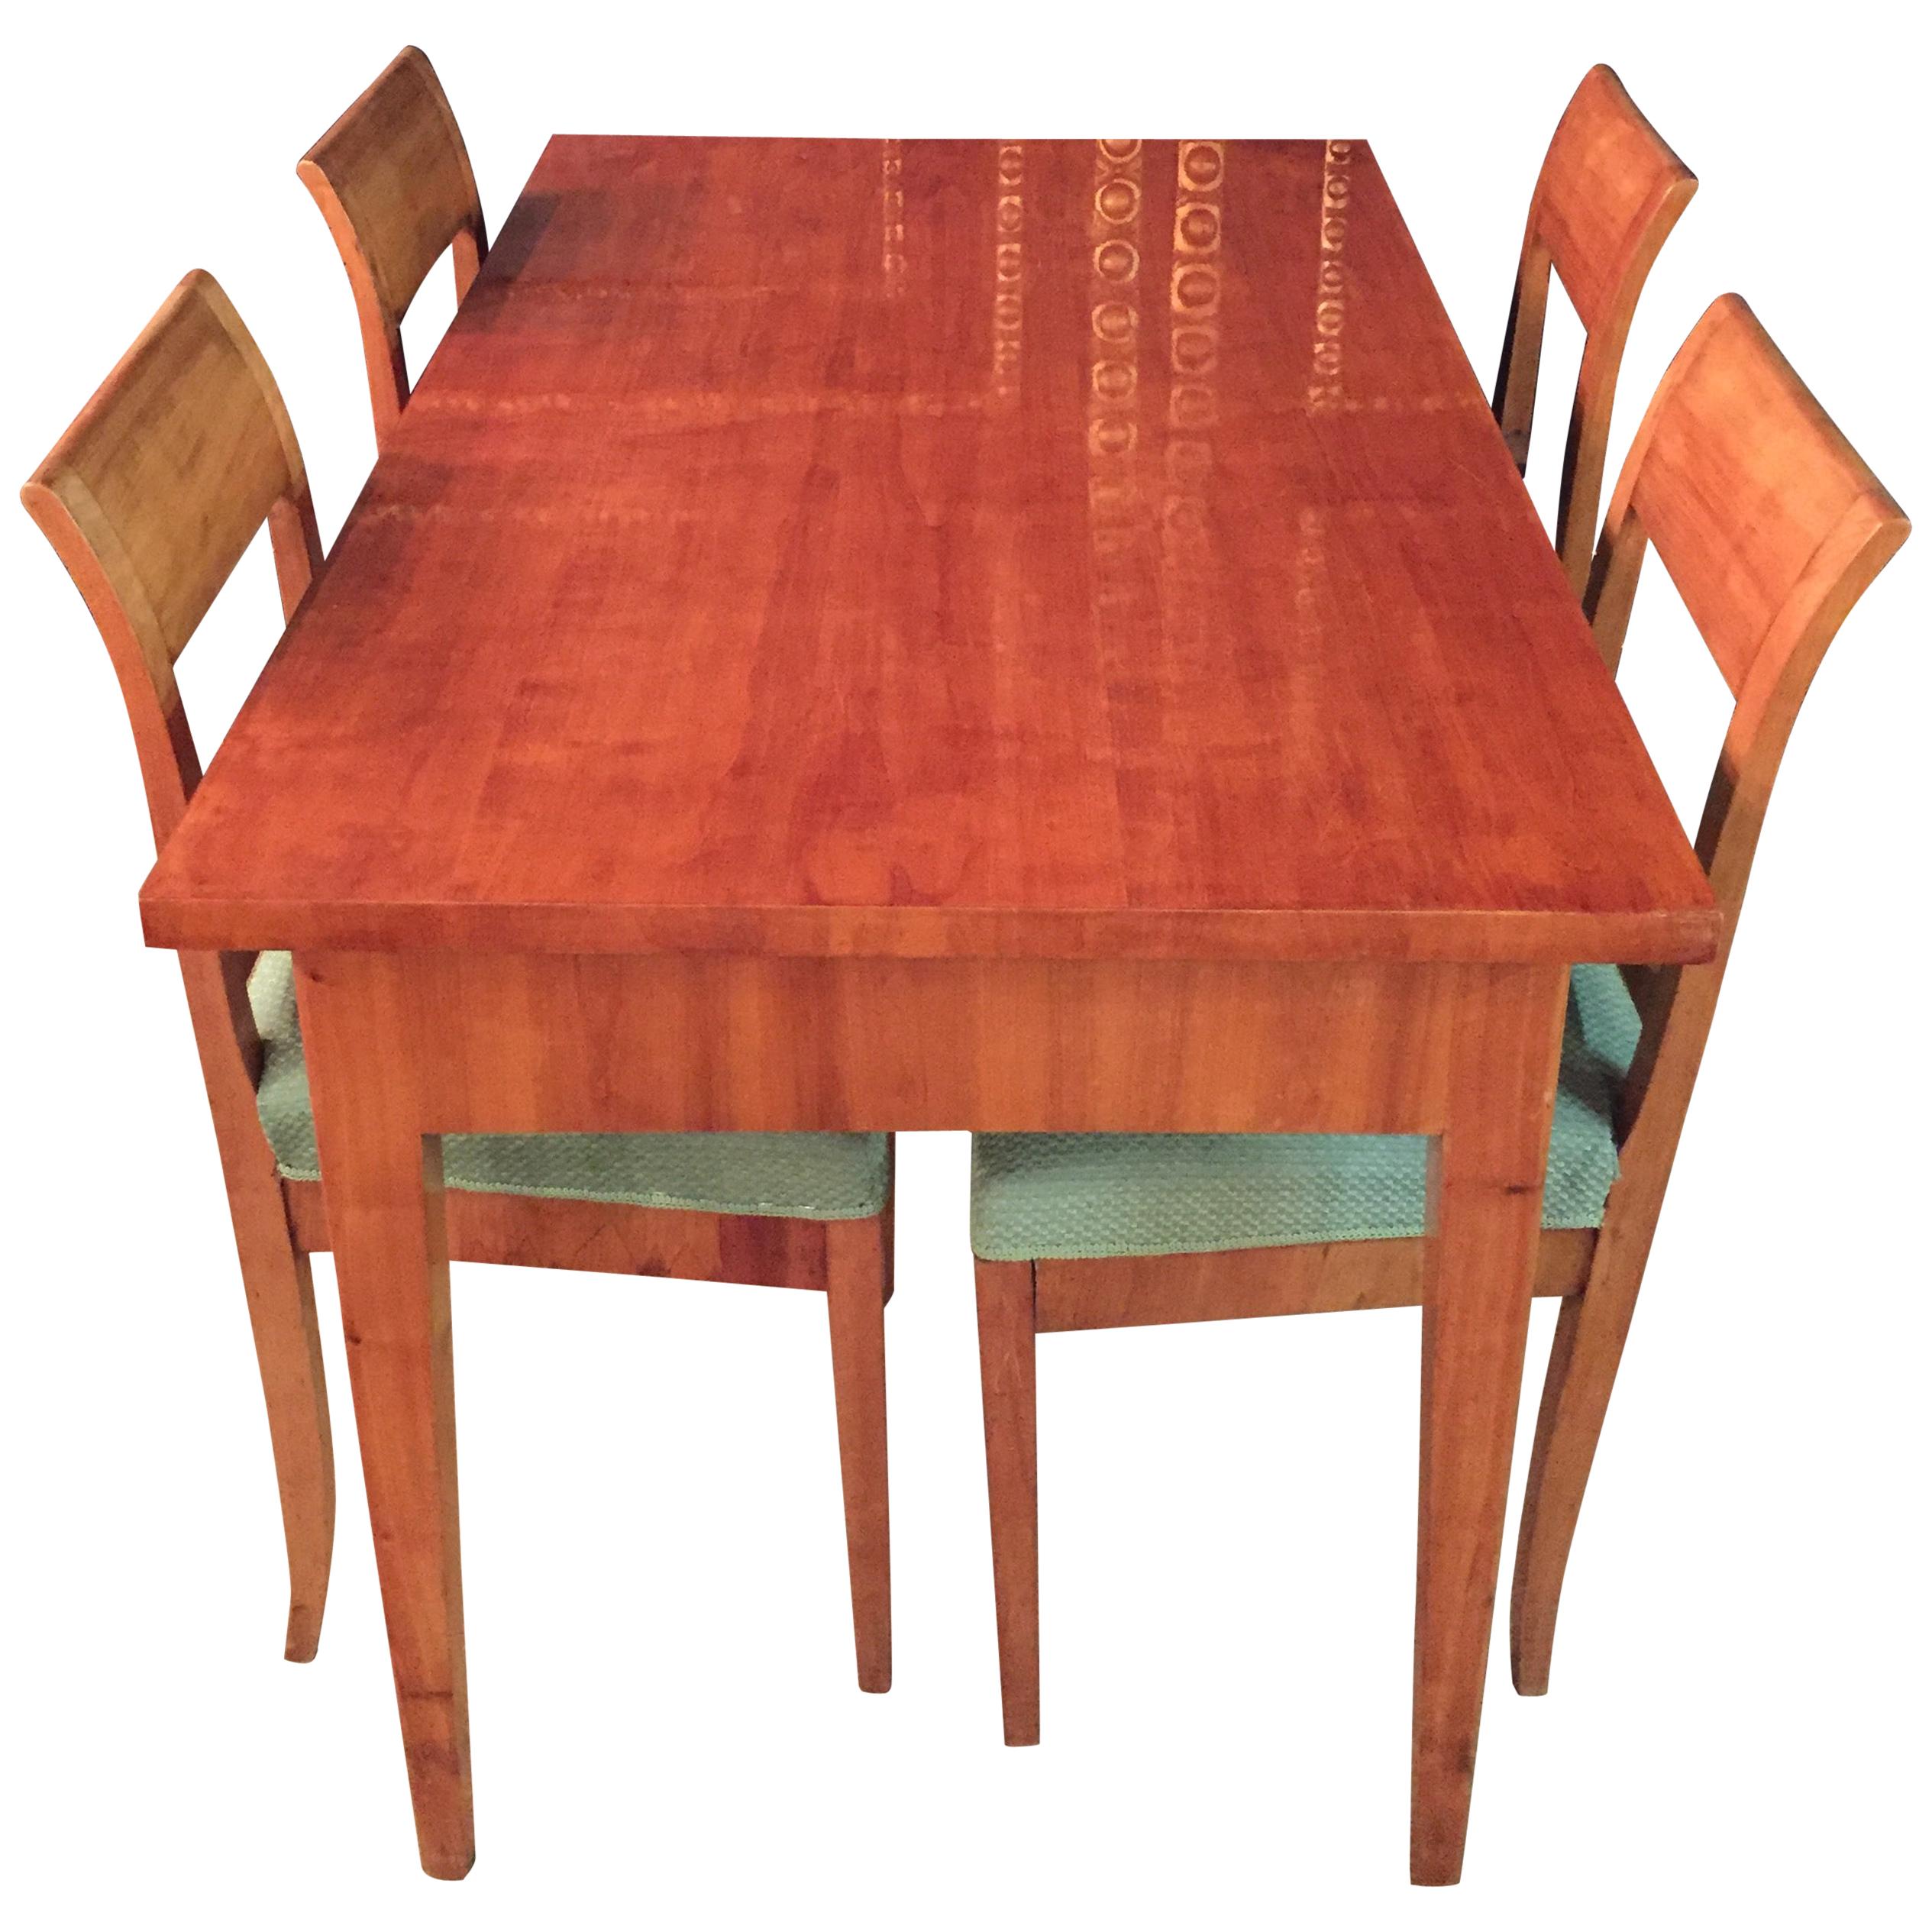 19th Century Original Biedermeier Dining Room /Dining Table with 4 Chairs Cherry